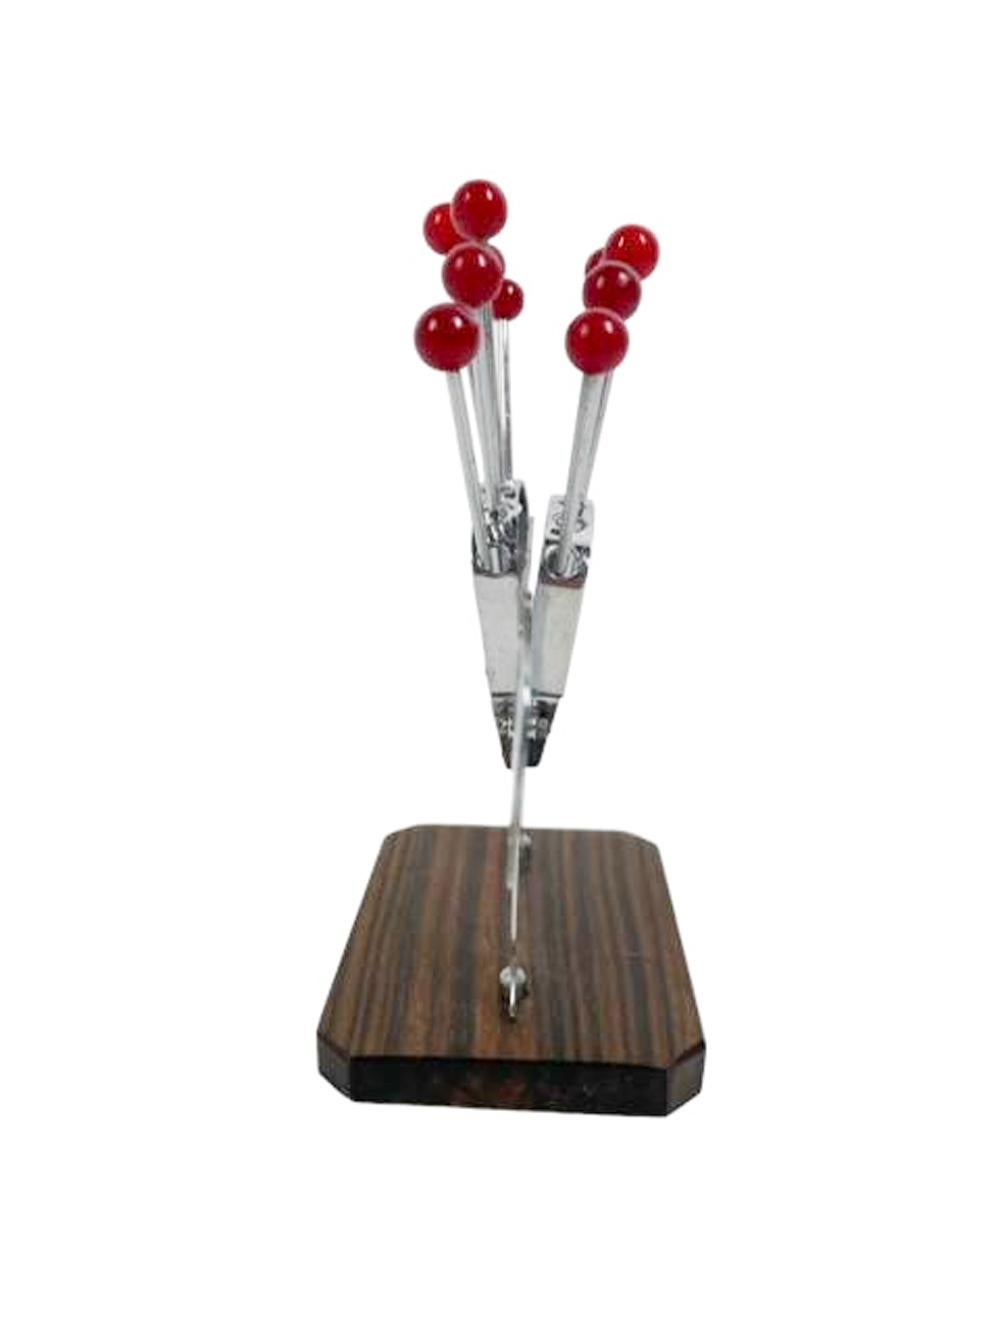 20th Century Art Deco Elephant Cocktail Pick Set in Chrome and Wood w/12 Red Ball Top Picks